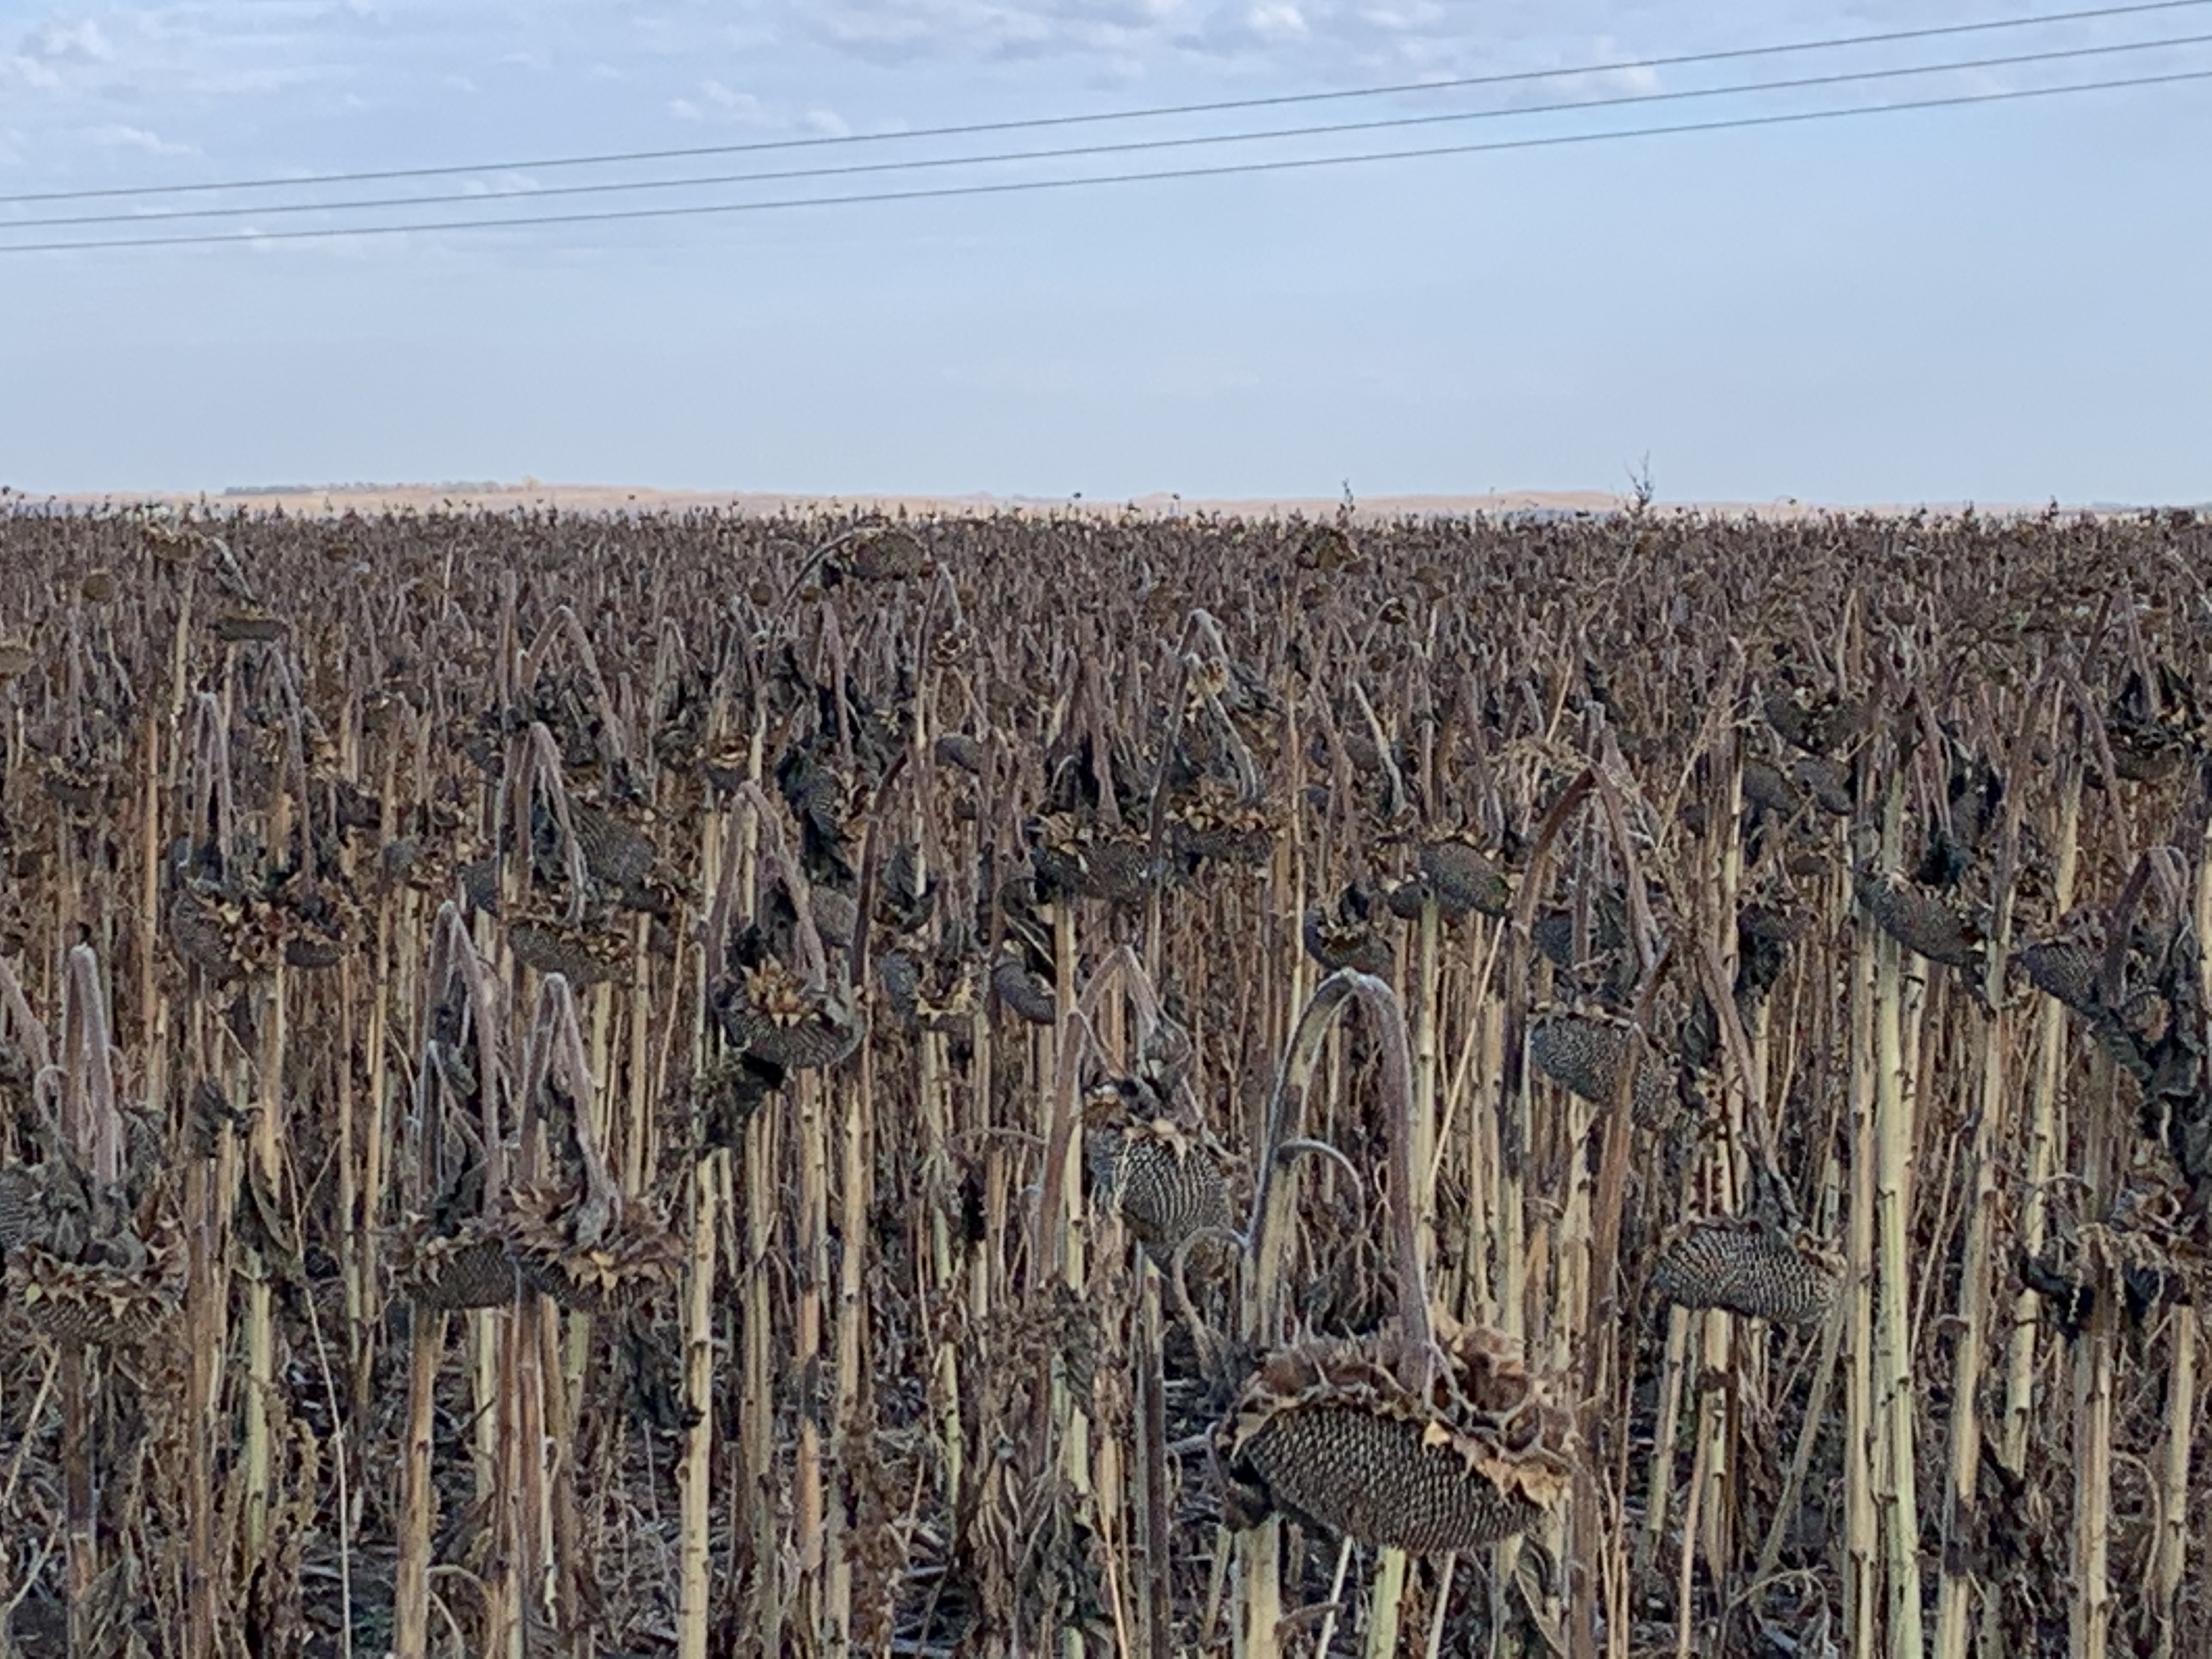 Mid-morning Ag News, October 15, 2021: Crookston, MN farmer finishes sunflower harvest with impressive yields